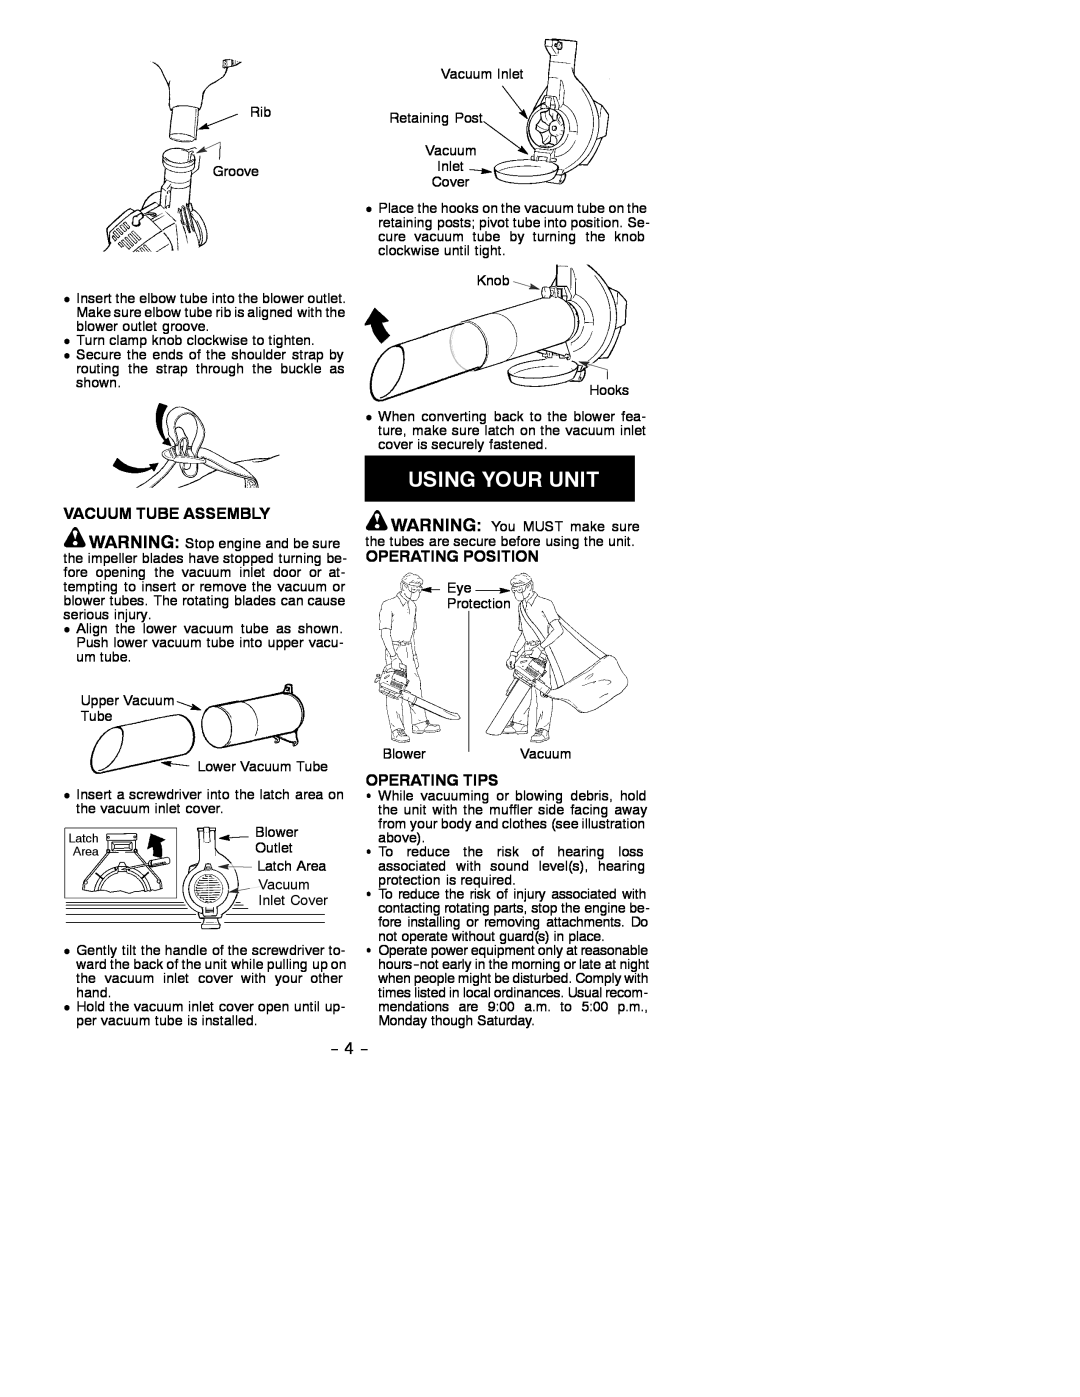 Electrolux BVM200 instruction manual Vacuum Tube Assembly, Operating Position, Operating Tips 